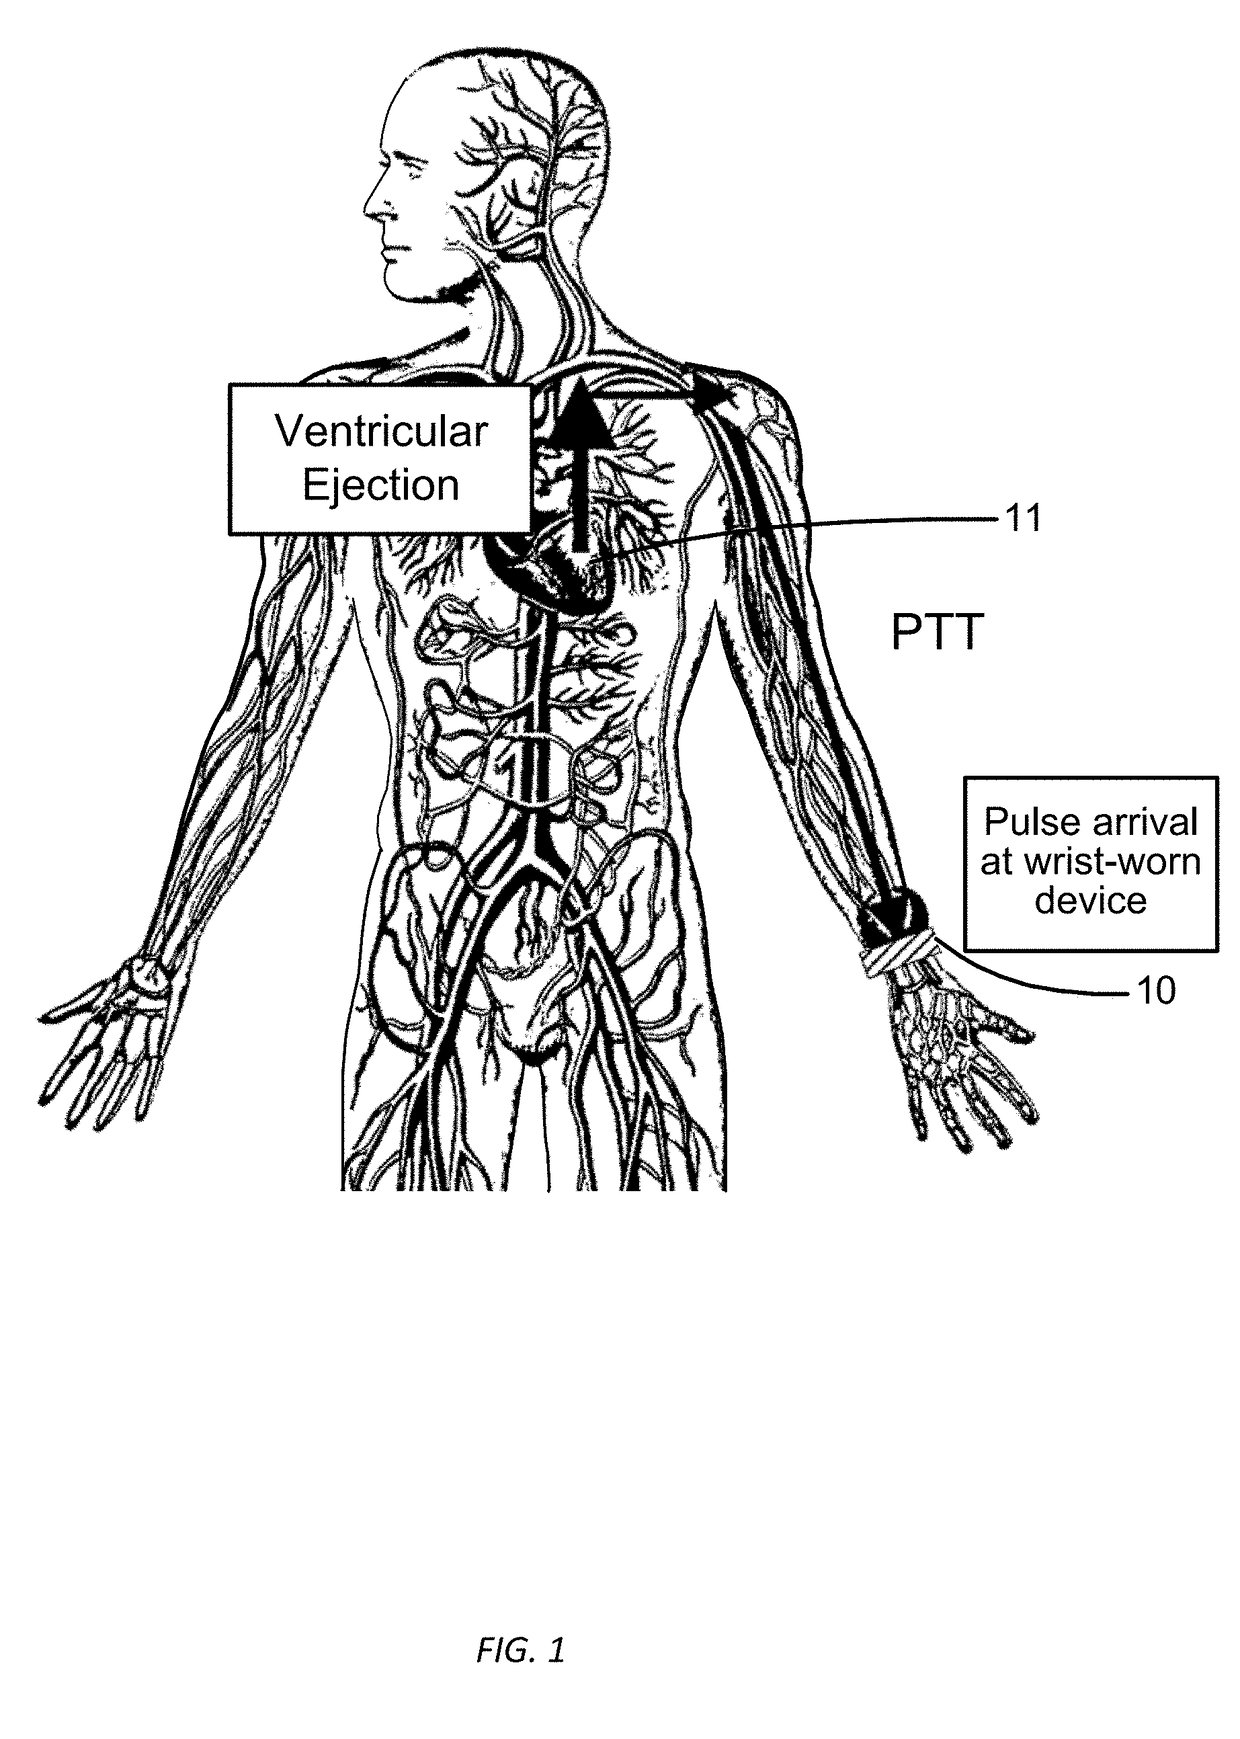 Electrical coupling of pulse transit time (PTT) measurement system to heart for blood pressure measurment